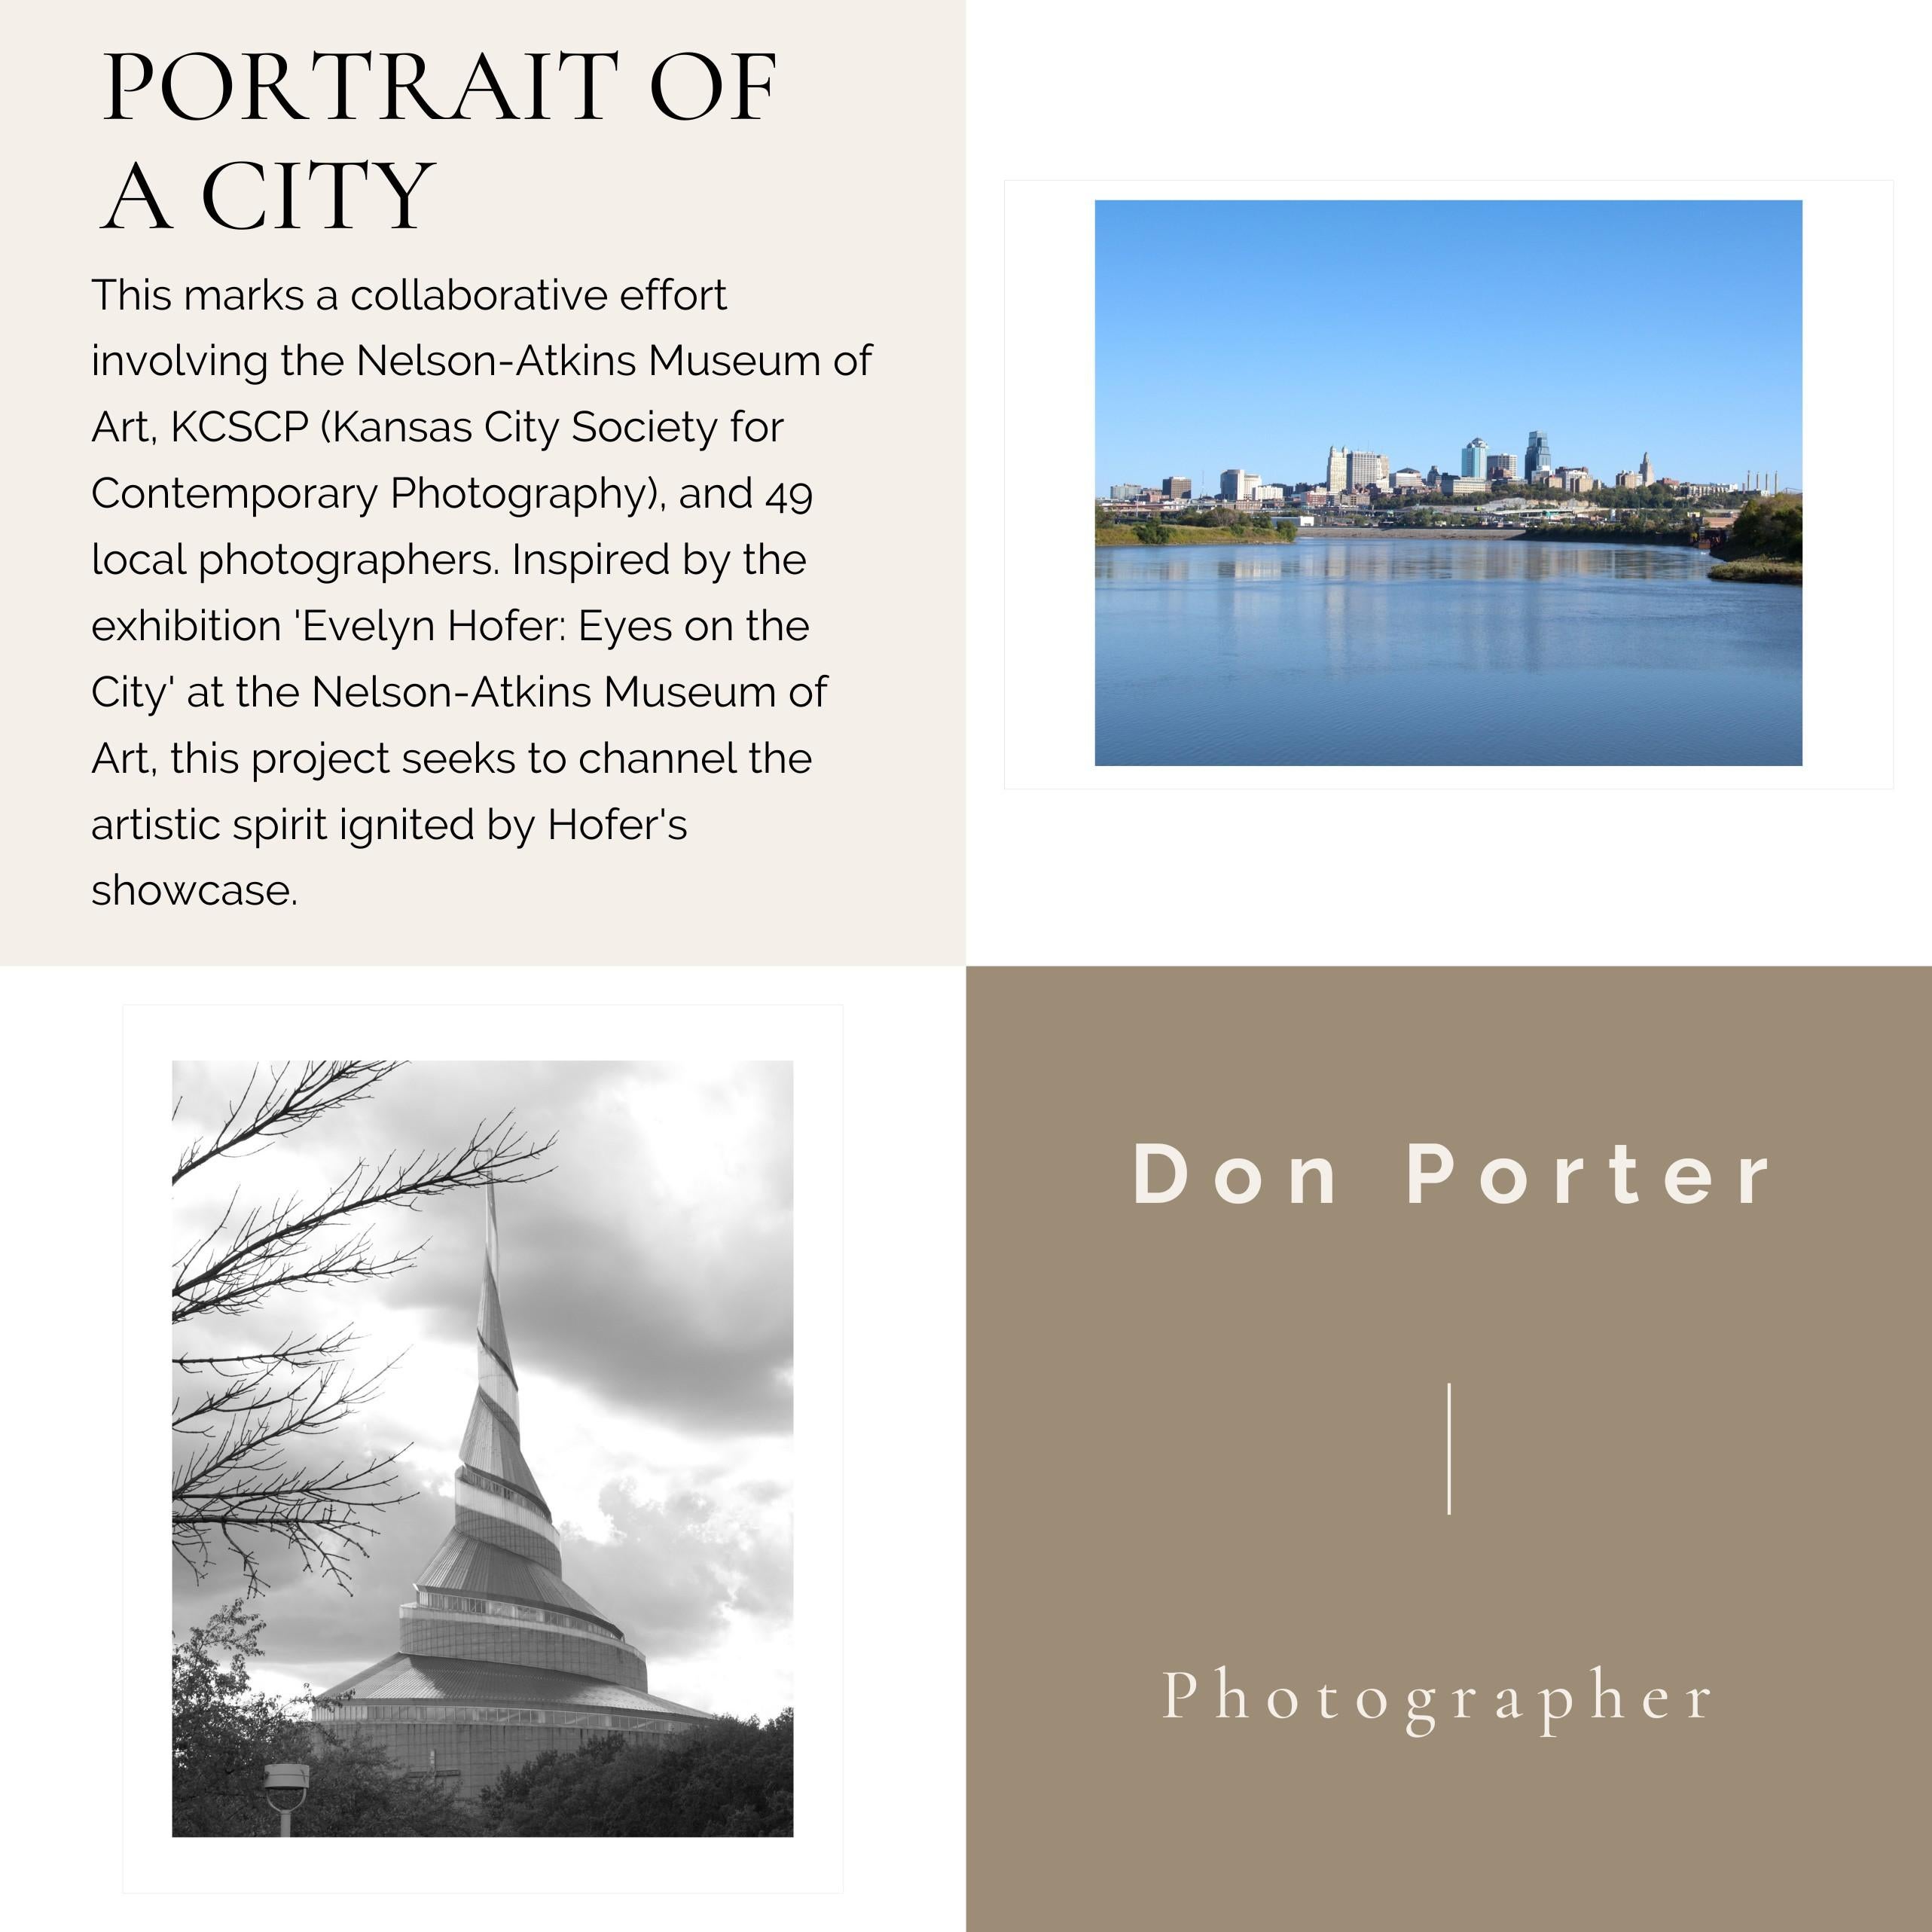 Don Porter
Temple
Year: 2024
Archival Pigment Print on
Hahnemuehle Baryta Rag
Framed Size: 13 x 13 x 0.25 inches
COA provided
*Ready to hang; matted and framed in a minimal black frame made from composite wood with standard plex

From 